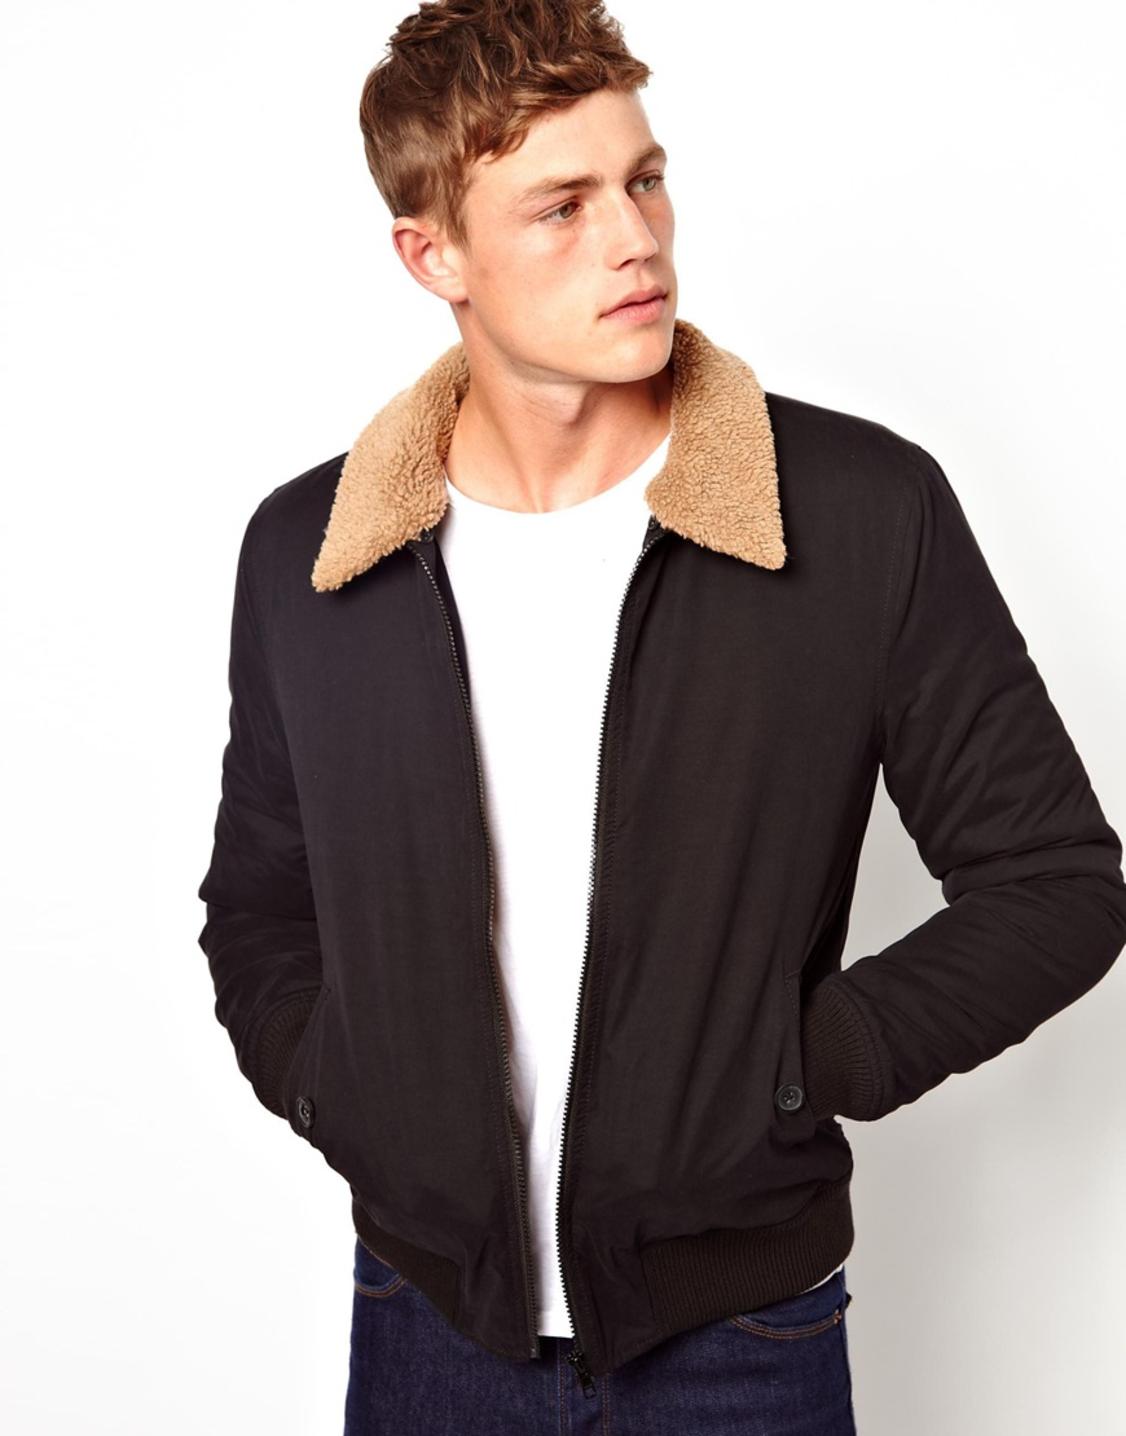 30 Best Bomber Jacket Outfits for Men & Styling Tips